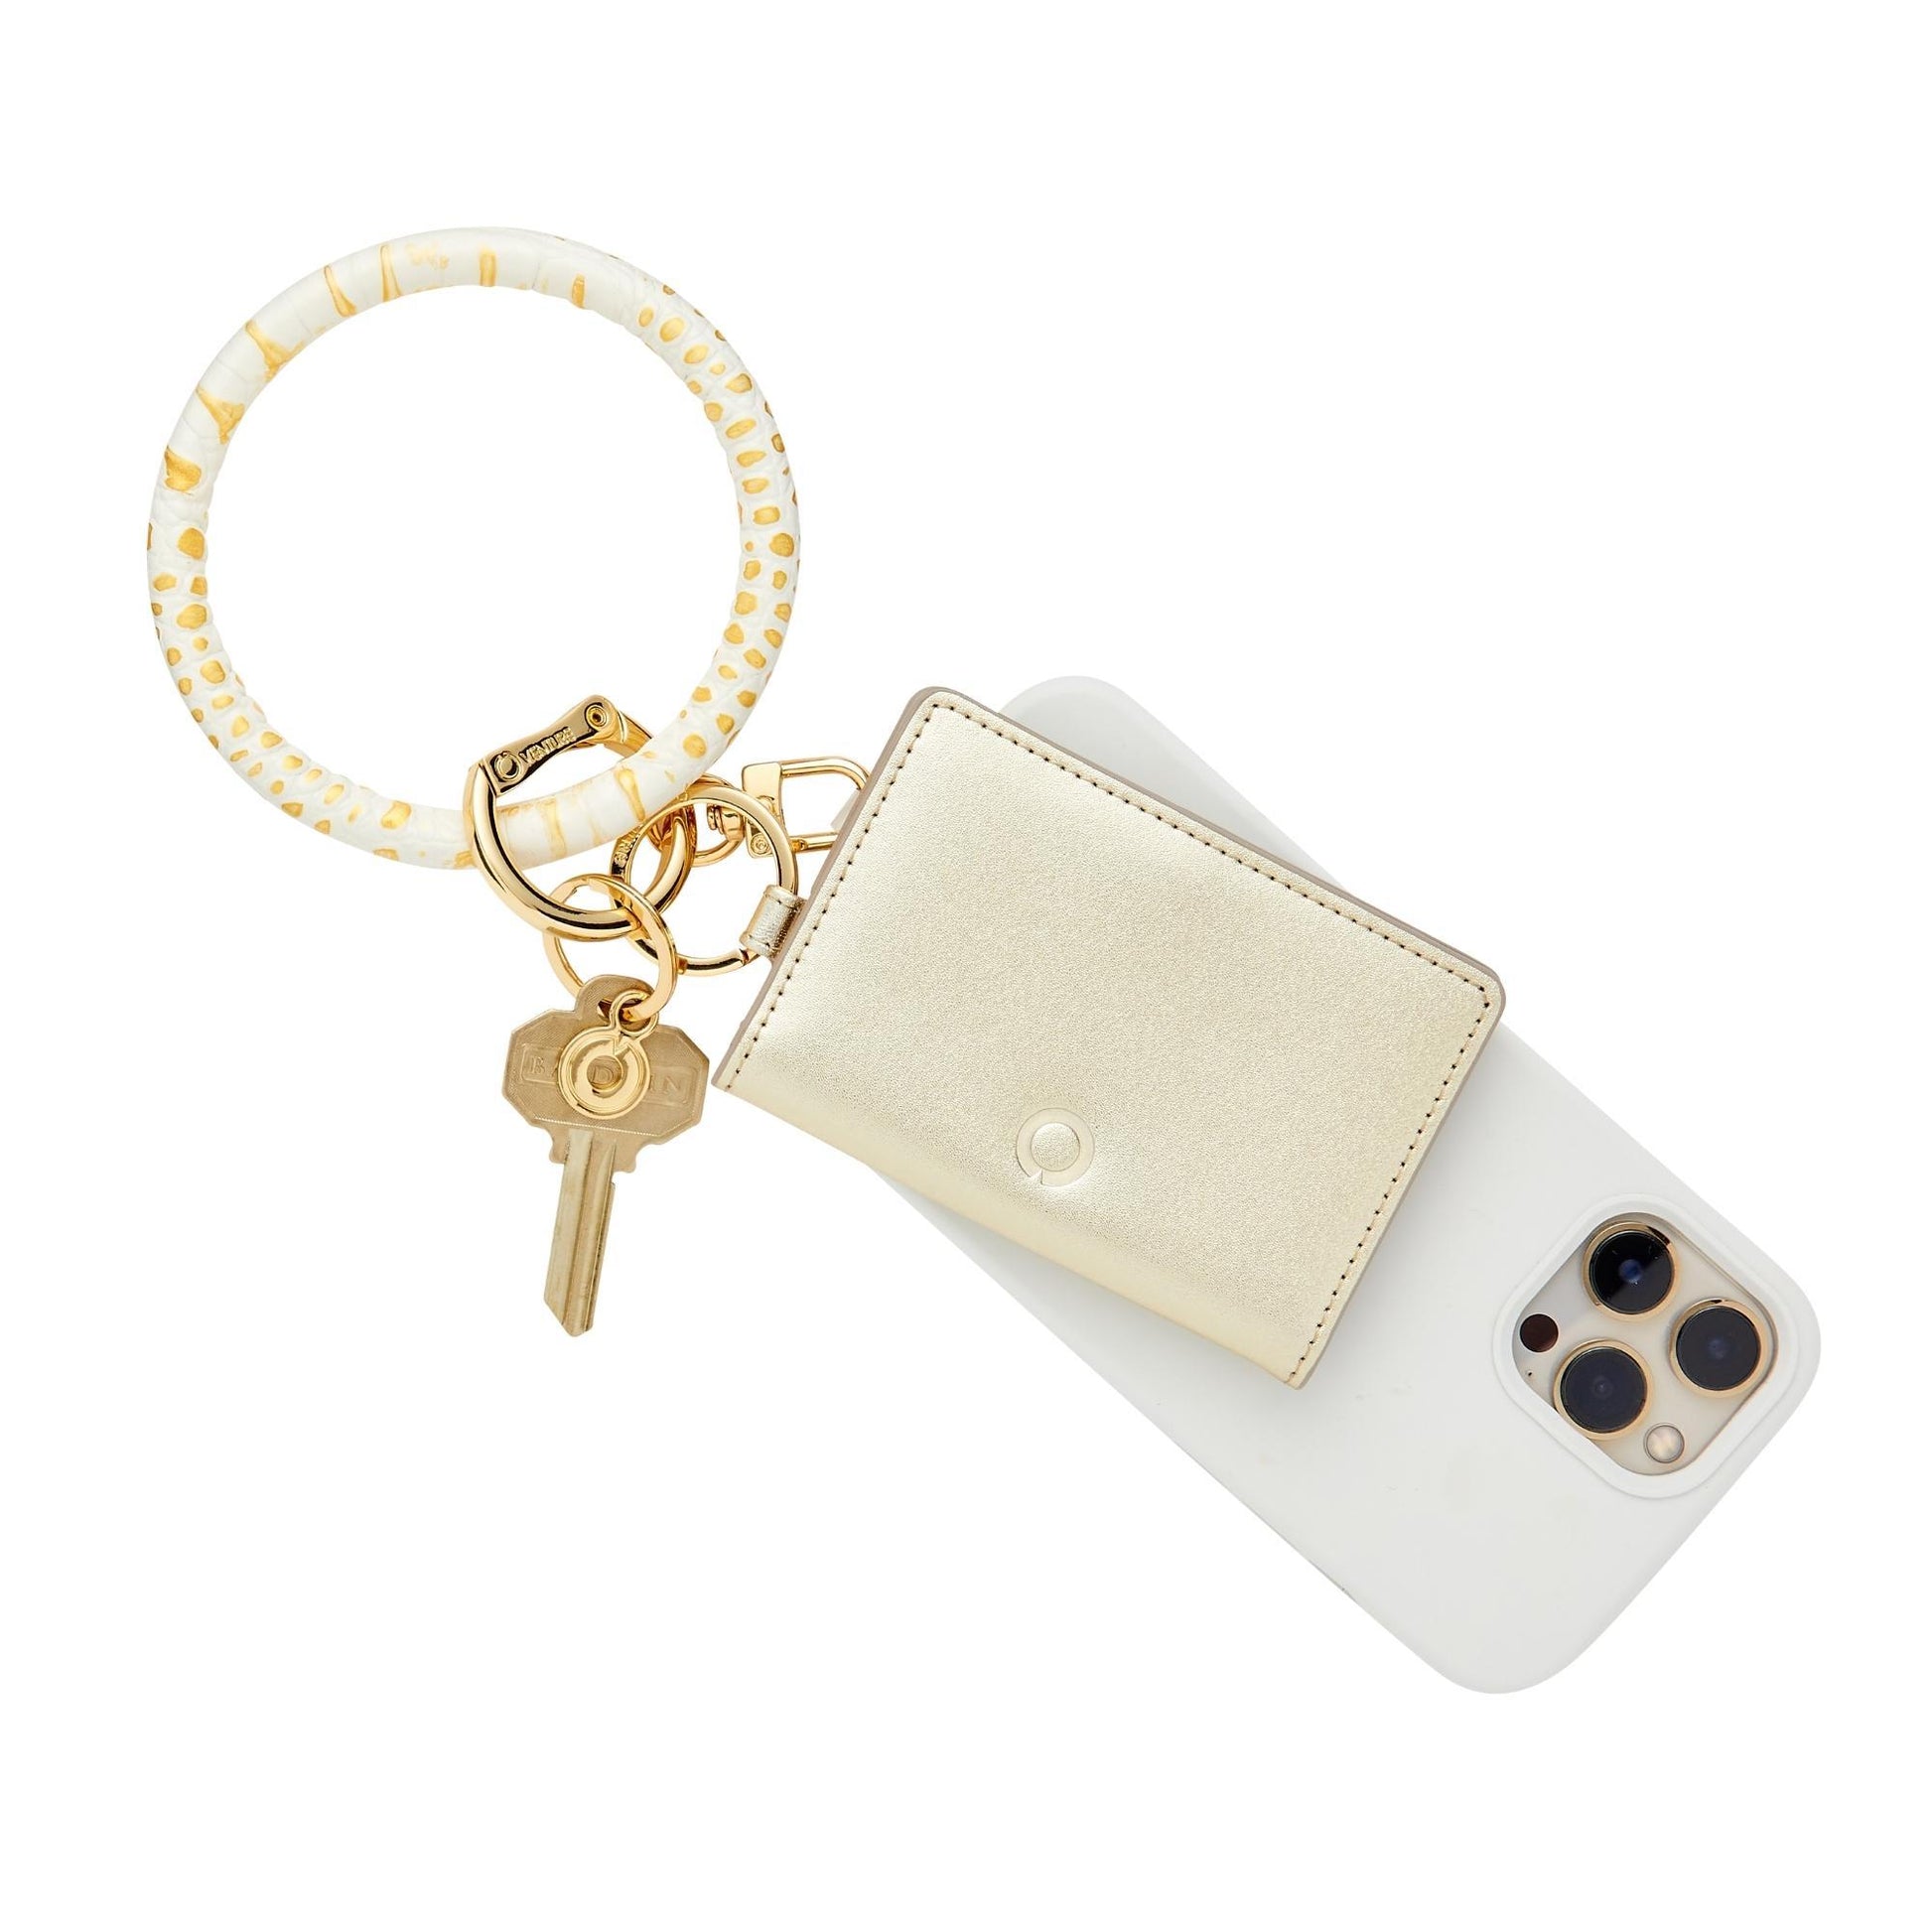 Gold Rush Croc embossed Big O key Ring with a gold leather wallet attached.  Id wallet with clear window and cards.  Phone connector is also attached.